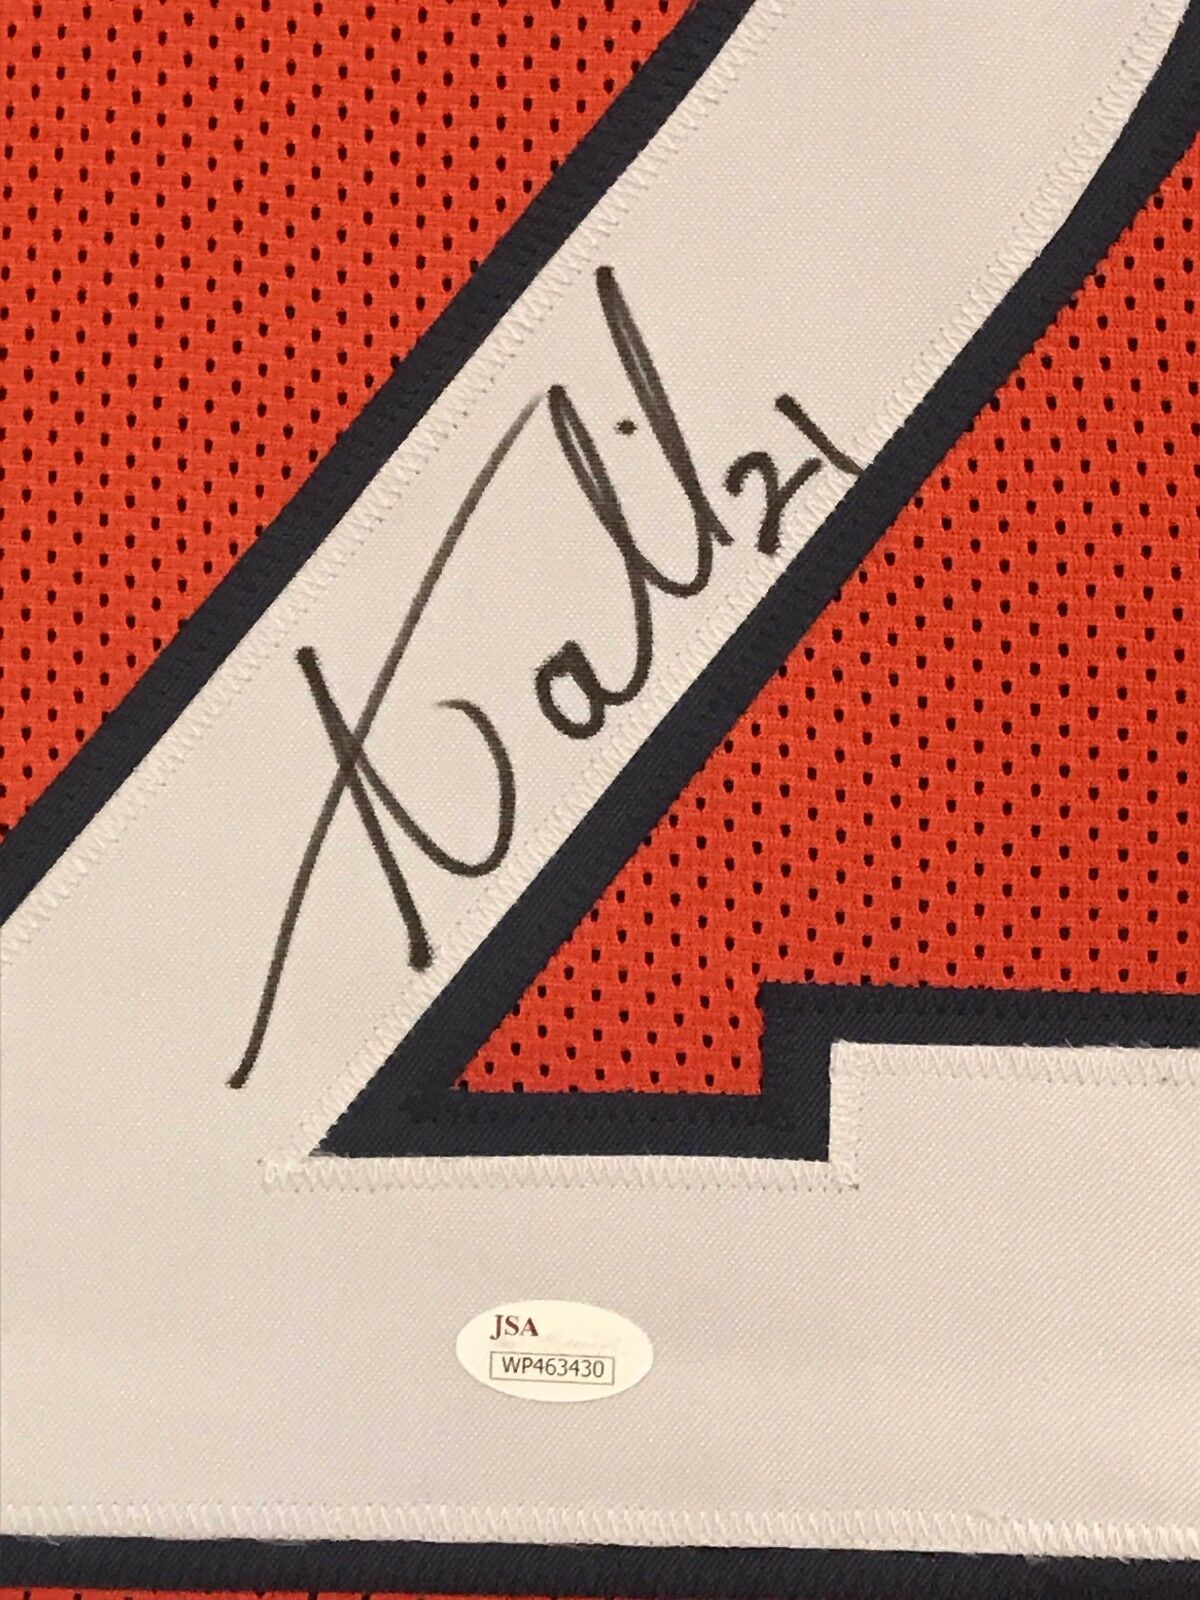 Aqib Talib Authentic Signed Pro Style Framed Jersey Autographed JSA